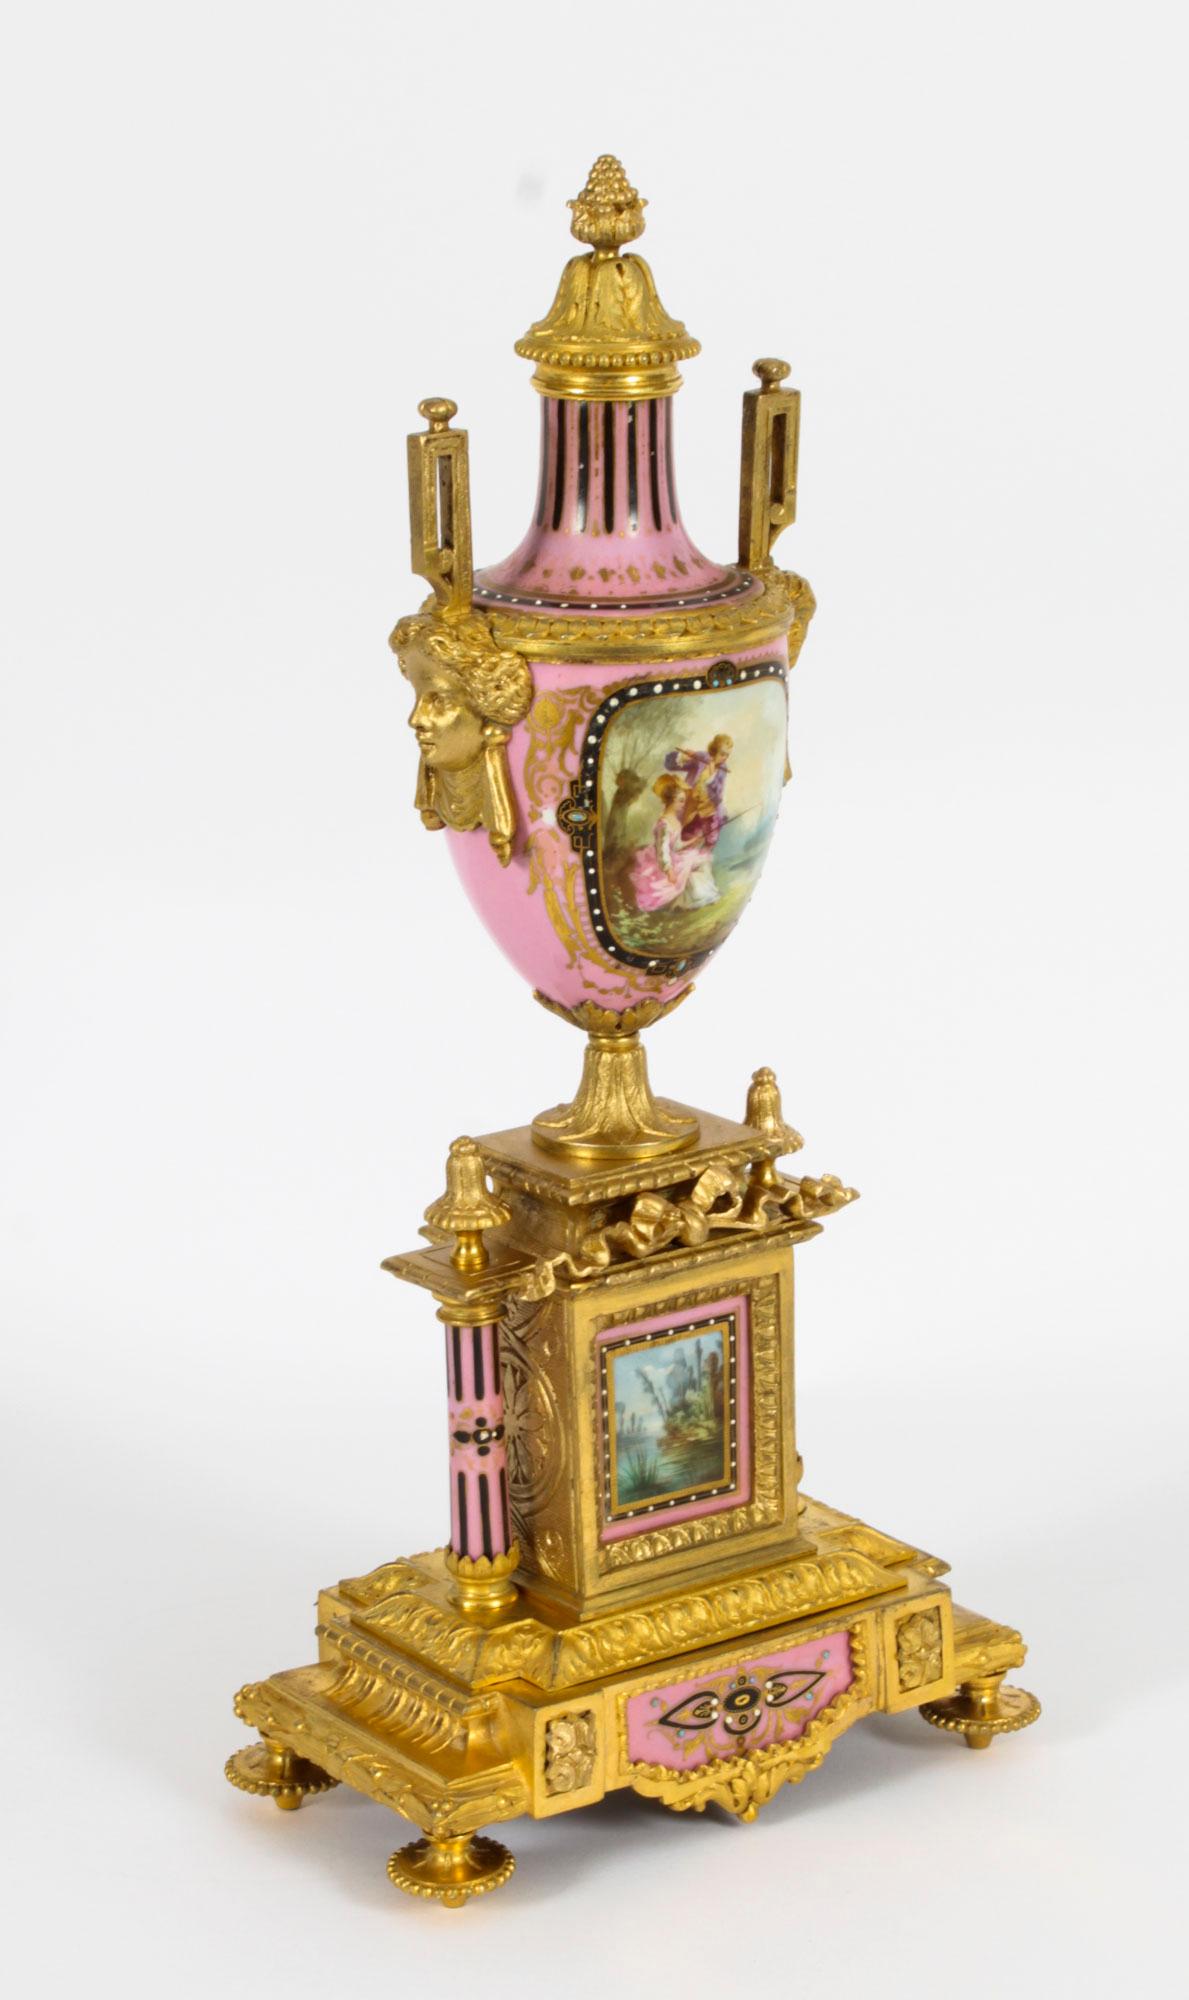 This is a stunning pair of French Sevres porcelain and ormolu garniture urns, circa 1880 in date.

The pink grounds are hand painted with courting couples, one by an arbour, the other fishing in a river, the reverse with landscape scenes.

They